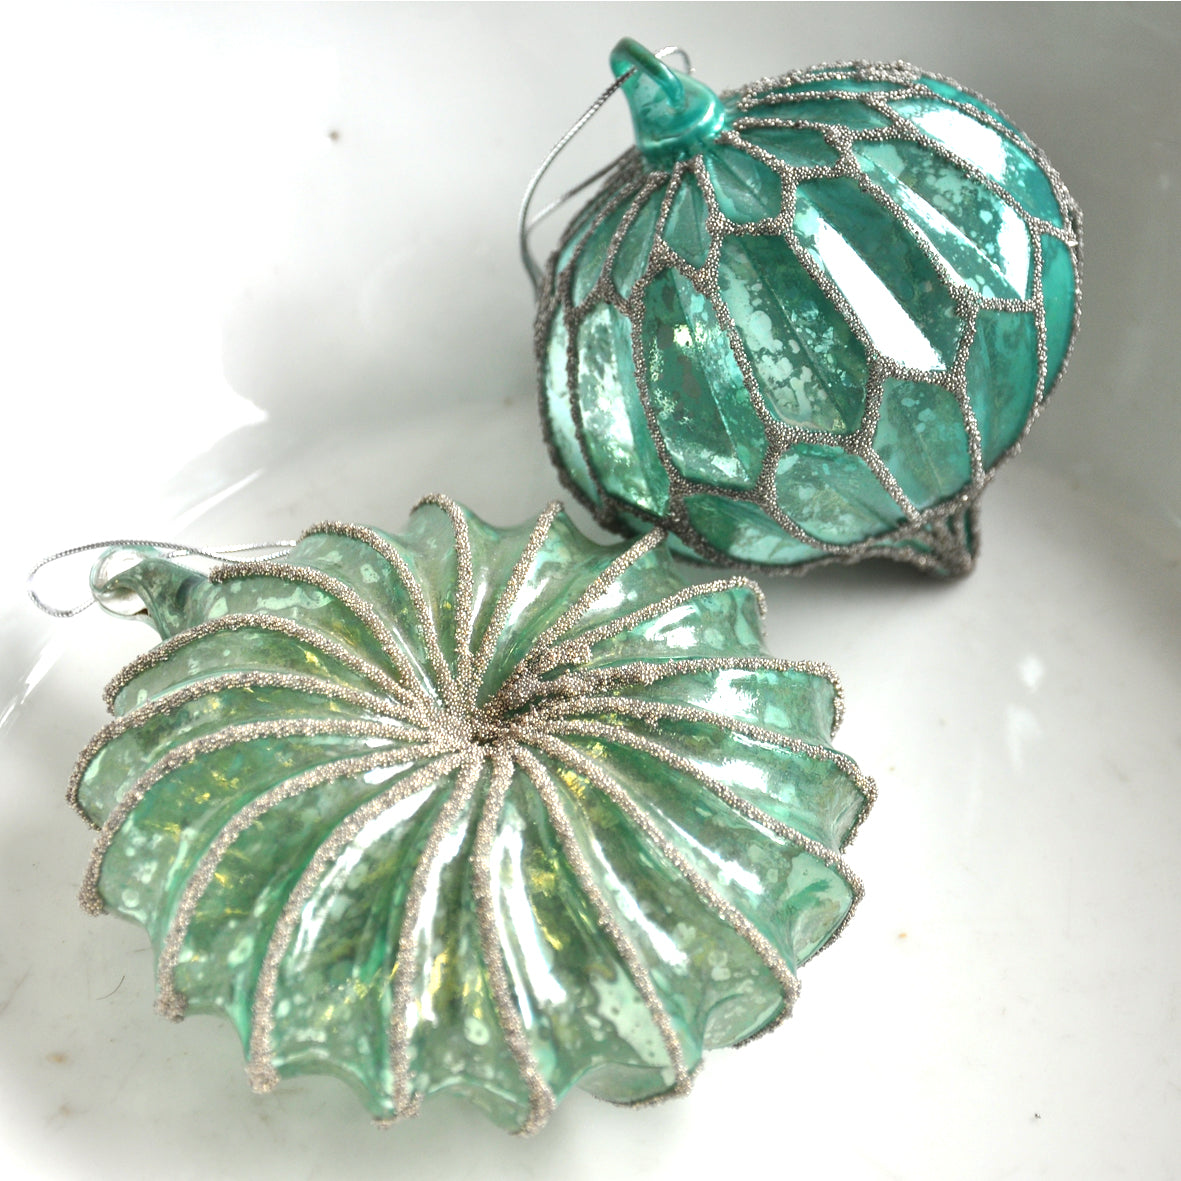 Antique-style Turquoise Christmas Tree Decoration with silver glitter detail